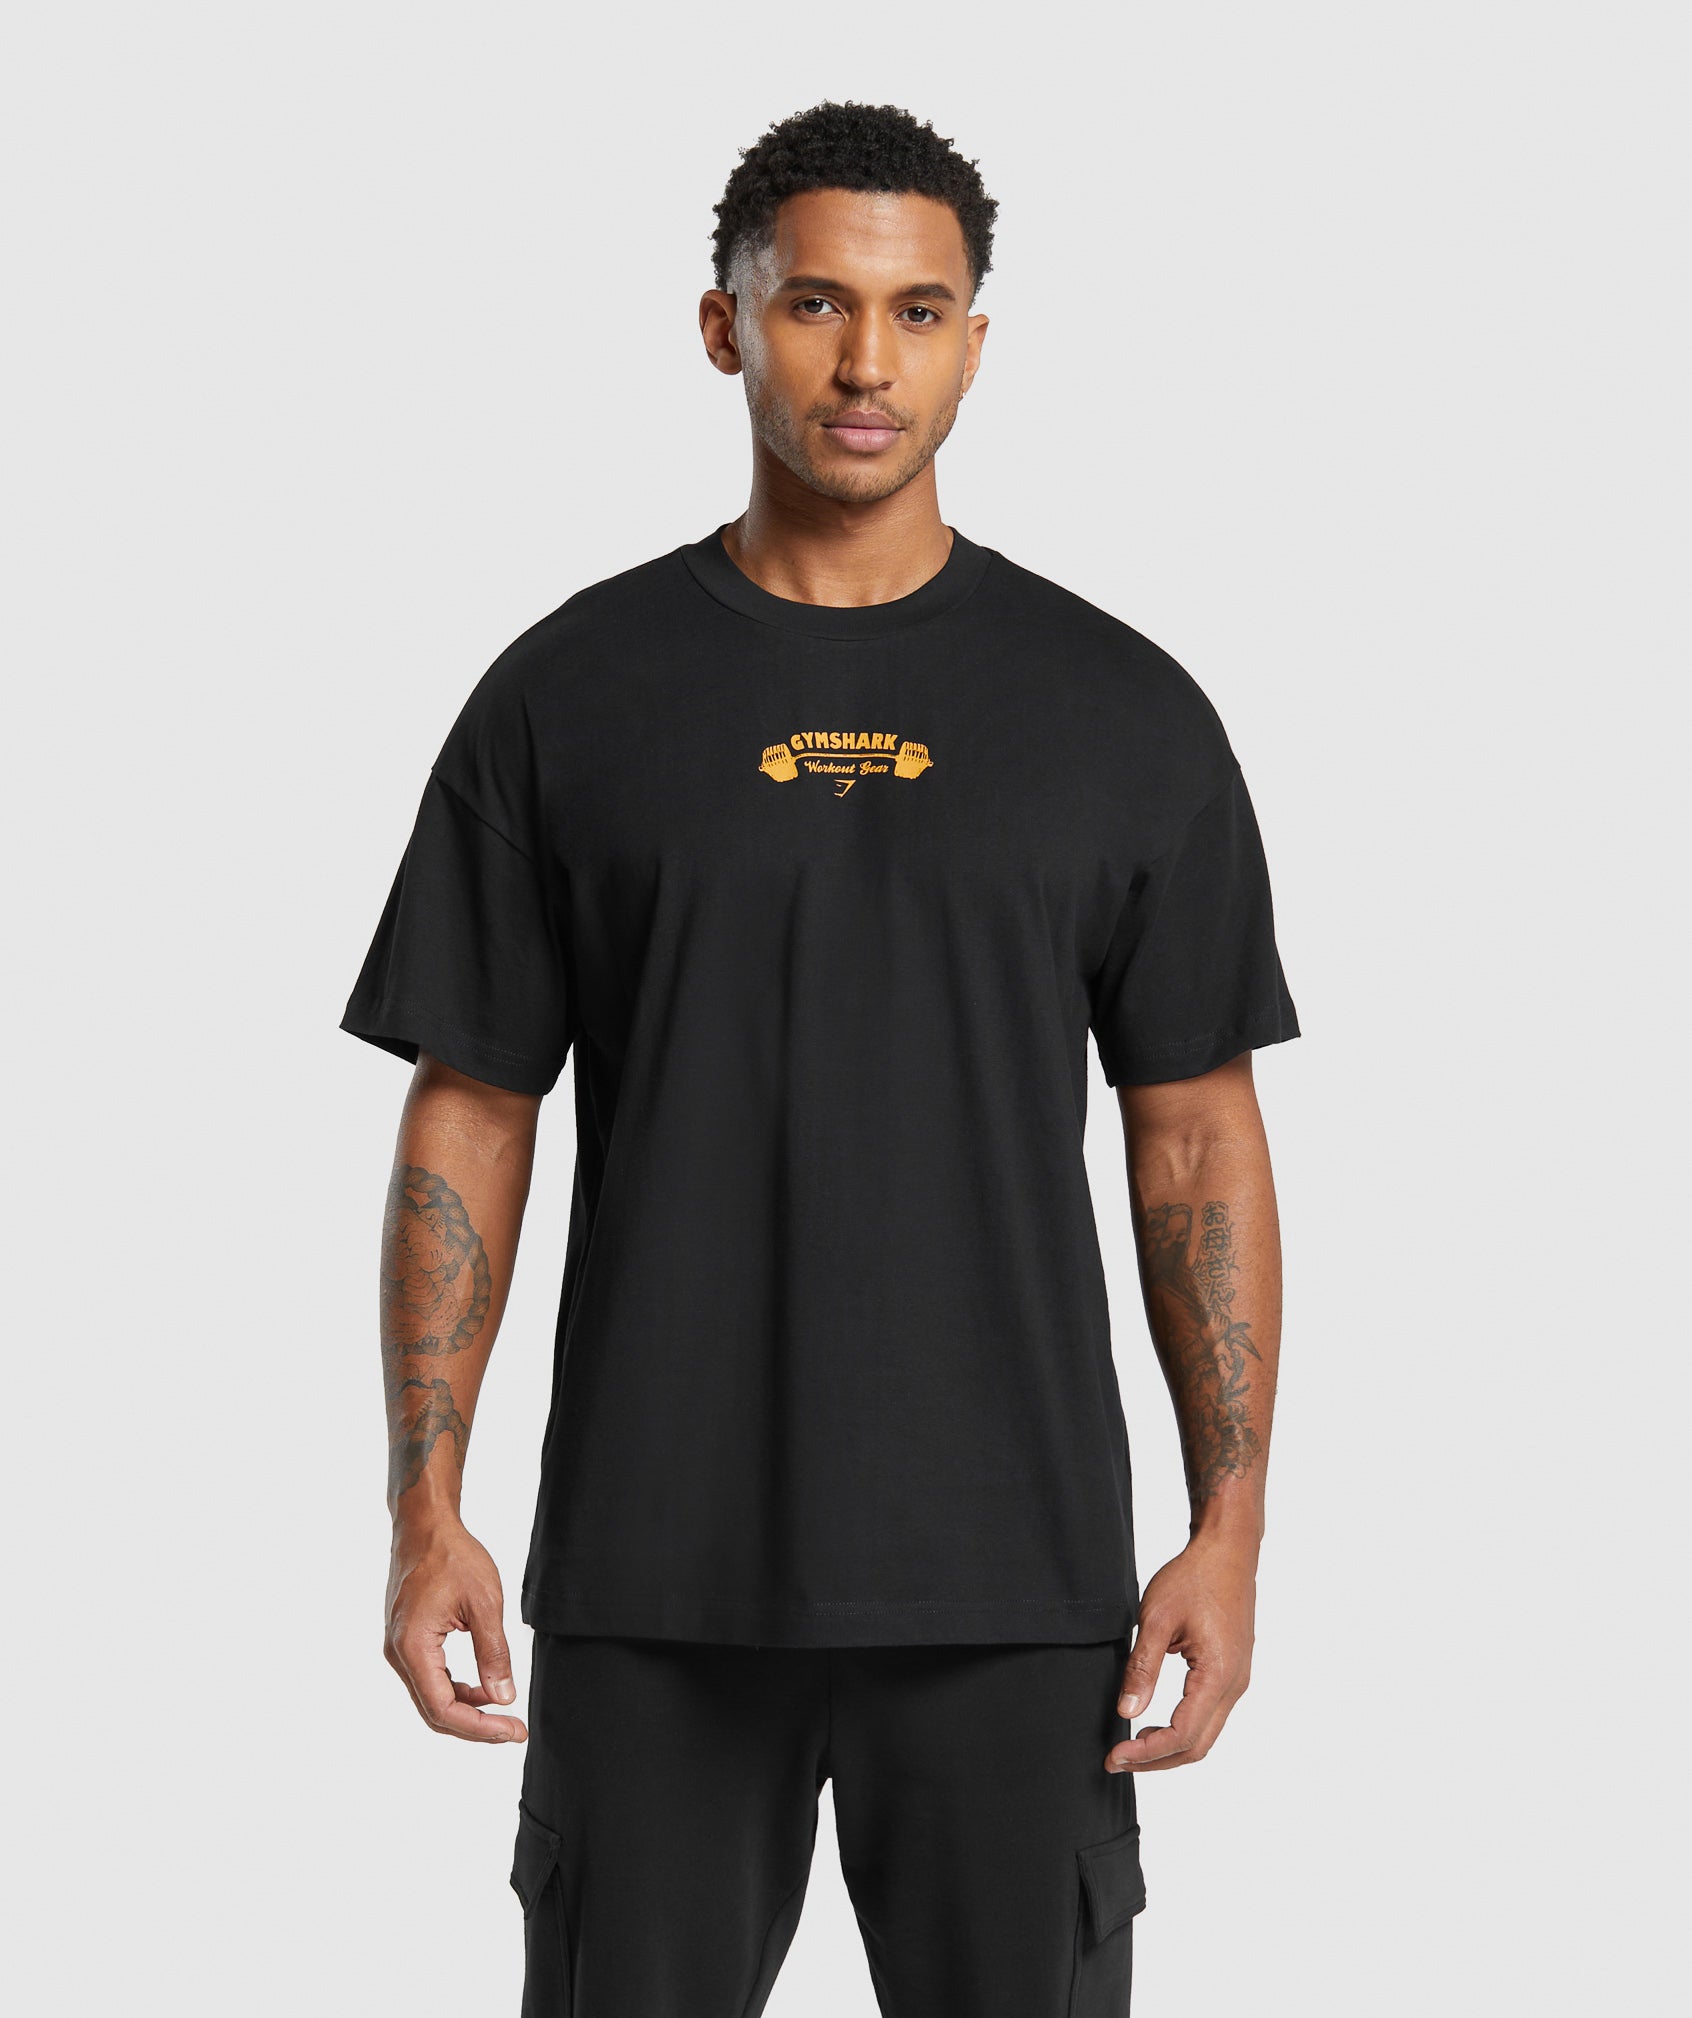 Workout Gear T-Shirt in Black - view 2